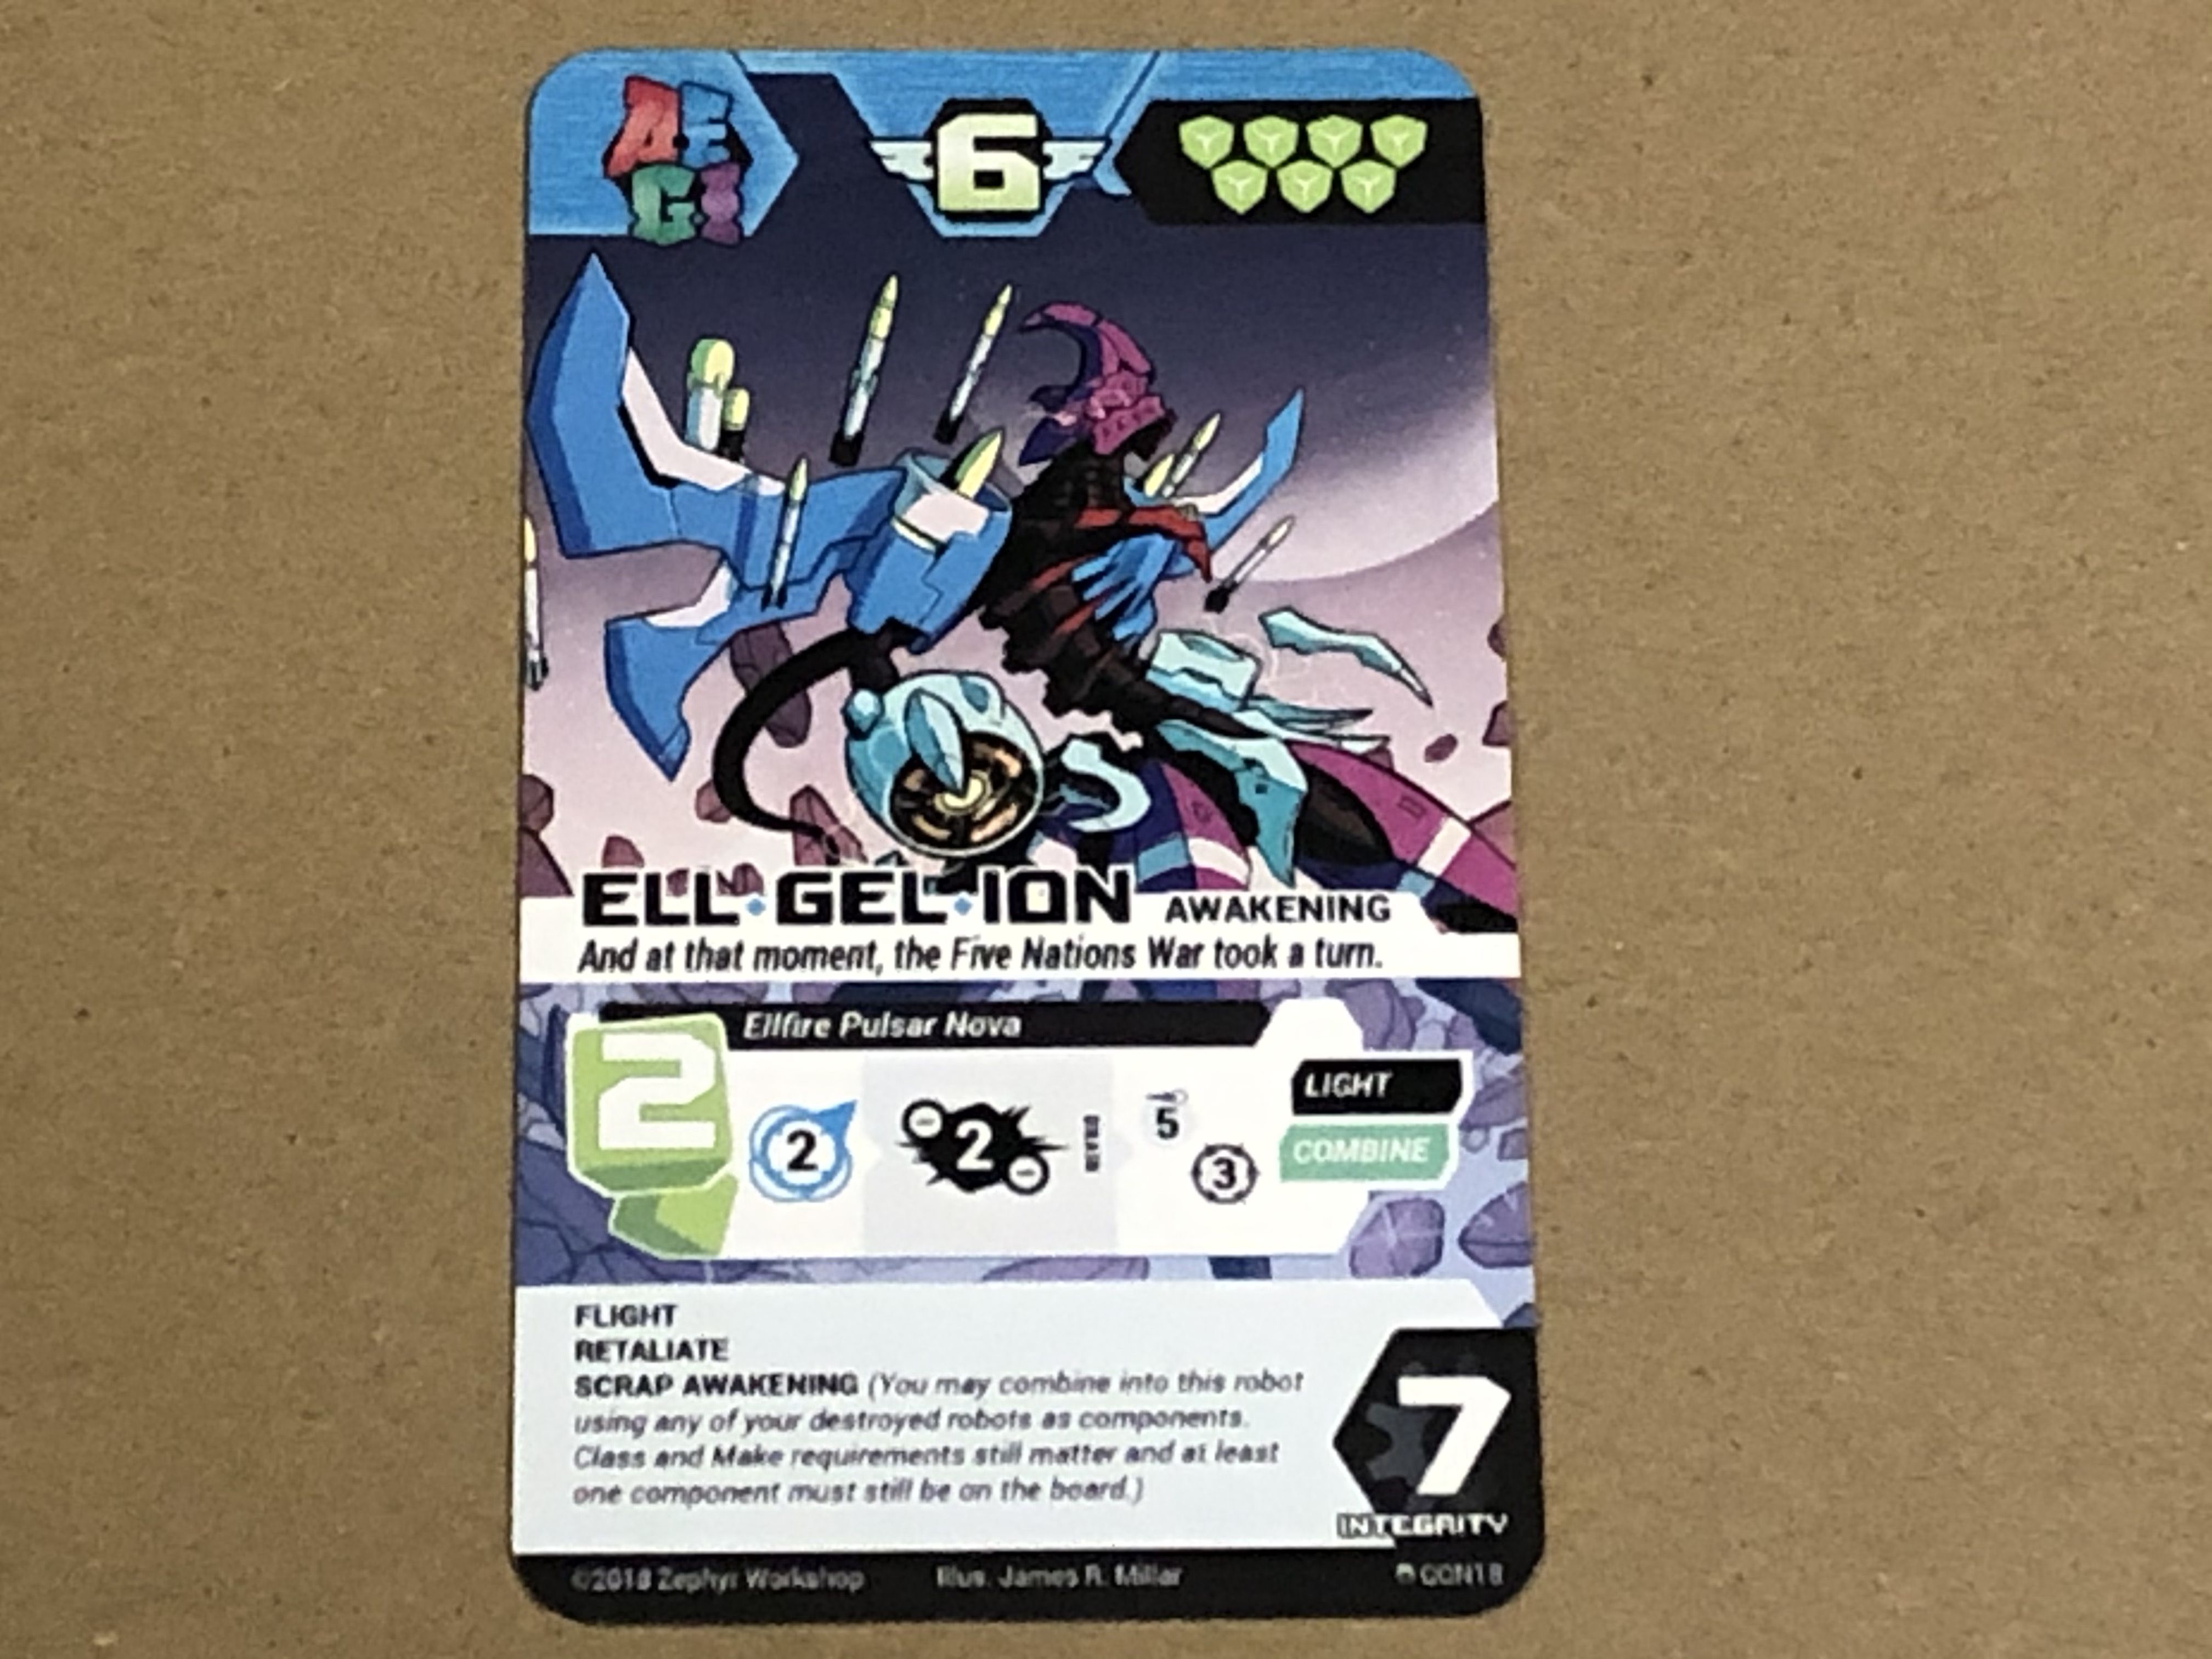 A.E.G.I.S.: Combining Robot Strategy Game – Ell Gel Ion Promo Card